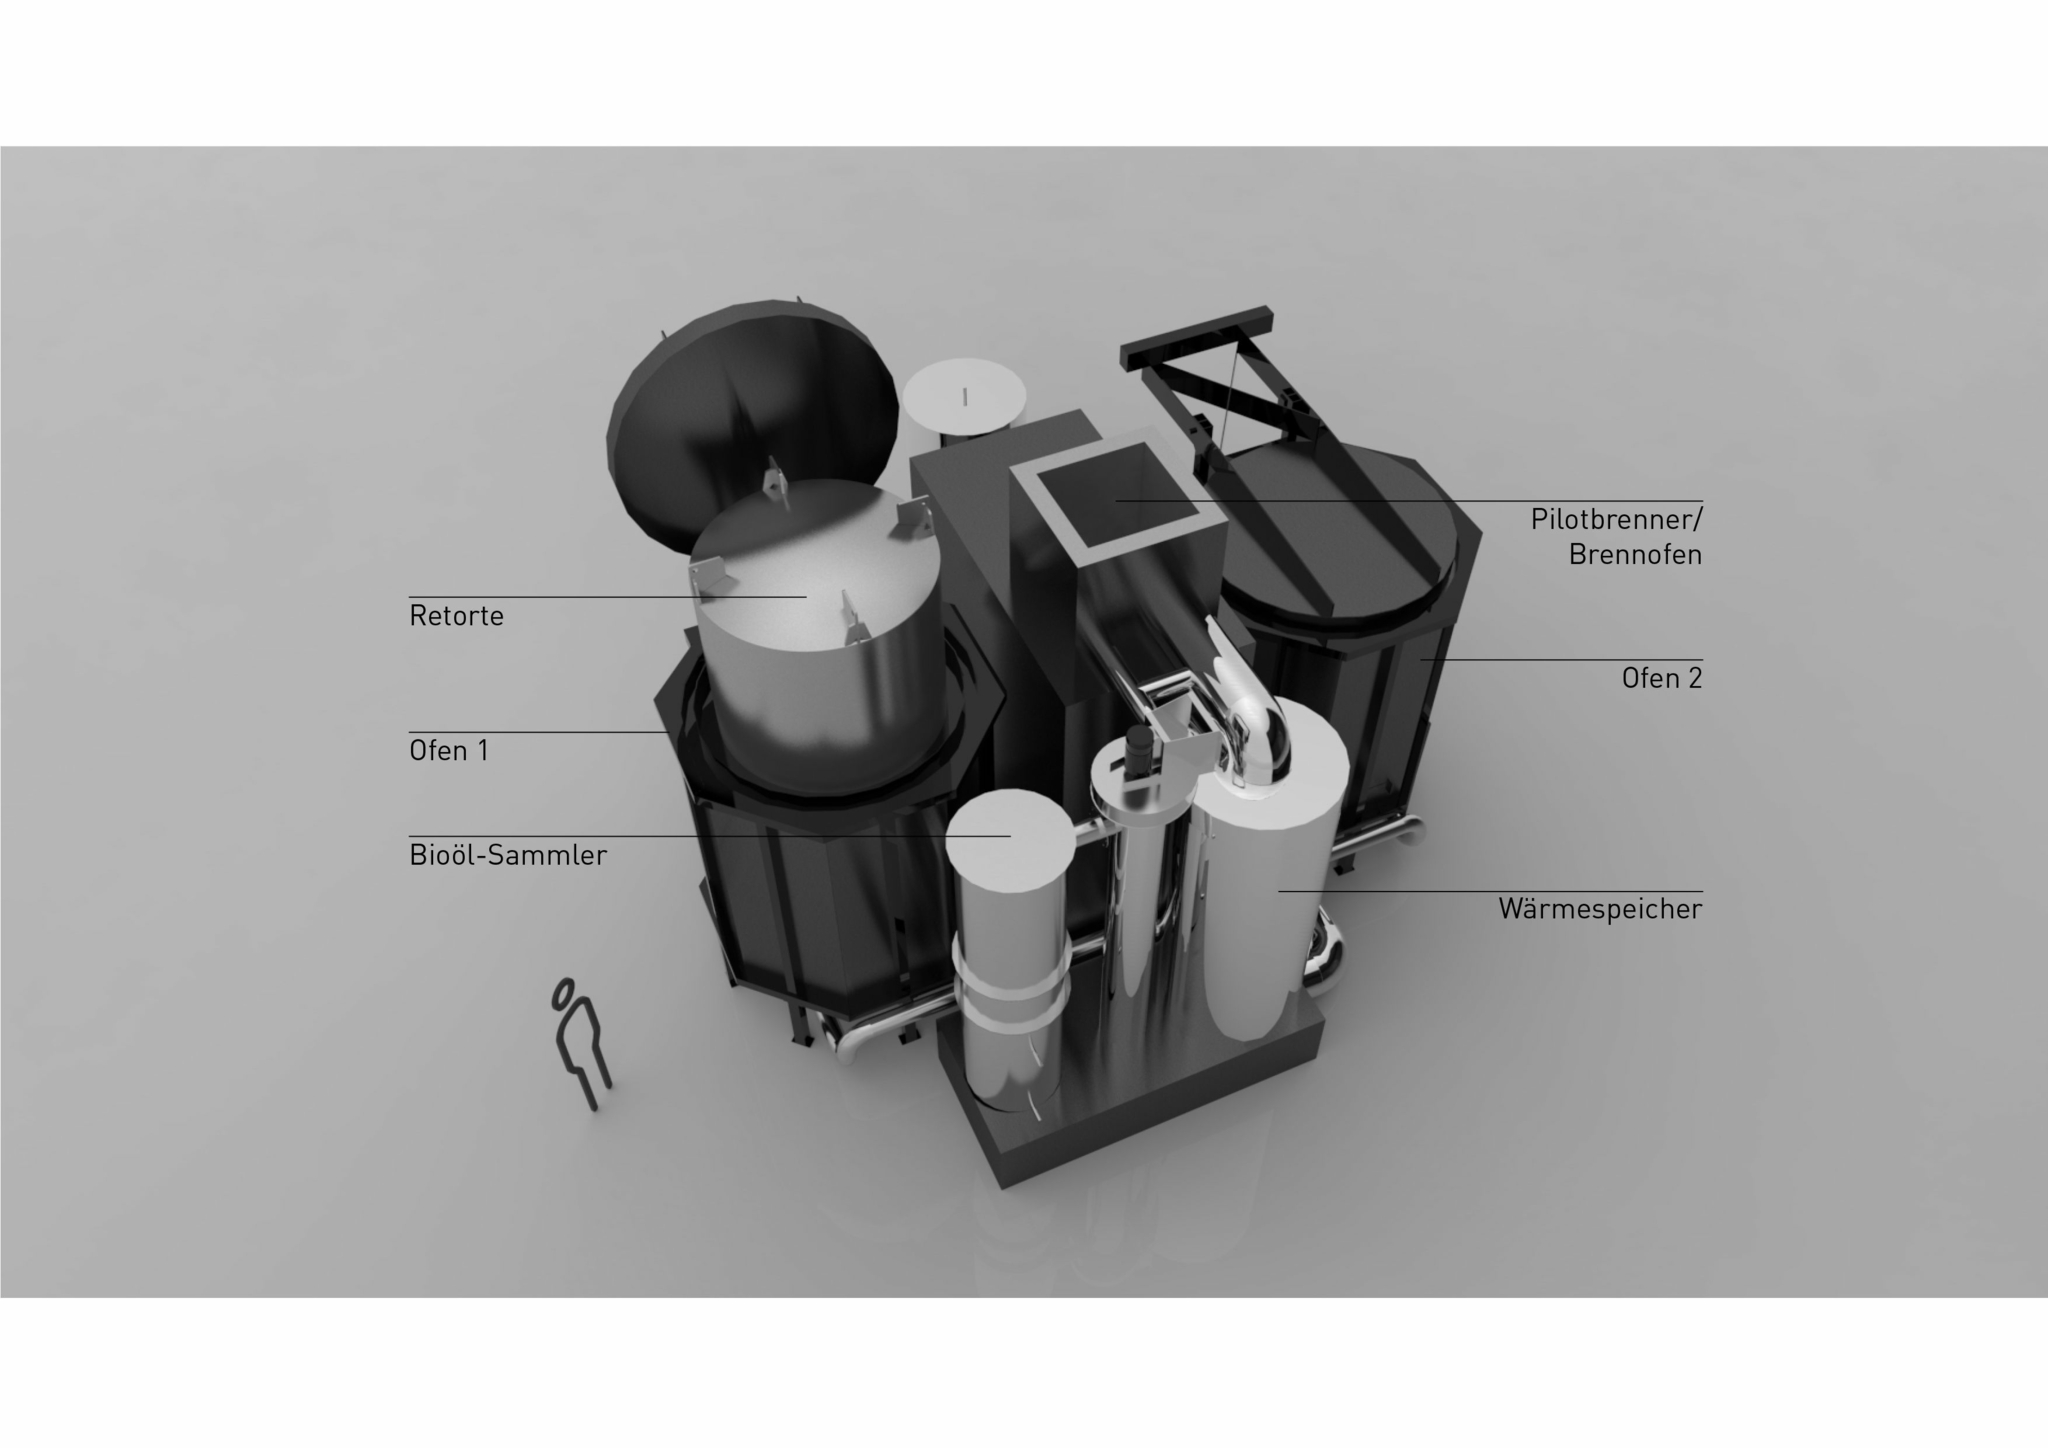 Schematic of the carbotwin carbonisation module showing the individual components, including the retort, oven 1, oven 2, pilot burner, bio-oil collector and heat accumulator. The scale is shown in relation to a human figure on the left.